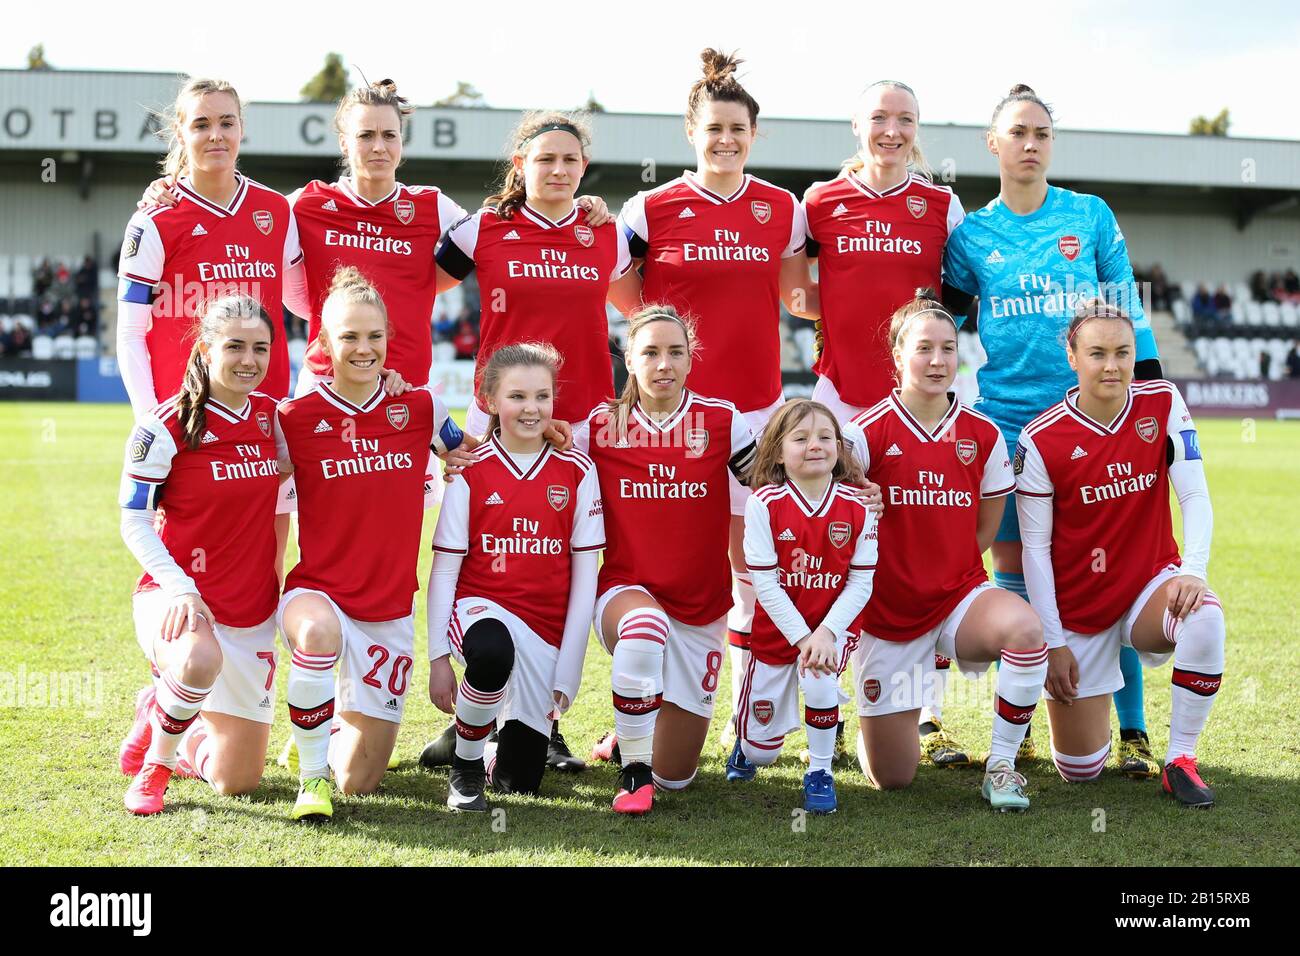 https://c8.alamy.com/comp/2B15RXB/london-uk-23rd-feb-2020-the-arsenal-starting-11-during-the-fa-cup-match-between-arsenal-and-lewes-ladies-at-meadow-park-borehamwood-on-sunday-23rd-february-2020-credit-jacques-feeney-mi-news-sport-photograph-may-only-be-used-for-newspaper-andor-magazine-editorial-purposes-license-required-for-commercial-use-credit-mi-news-sport-alamy-live-news-2B15RXB.jpg